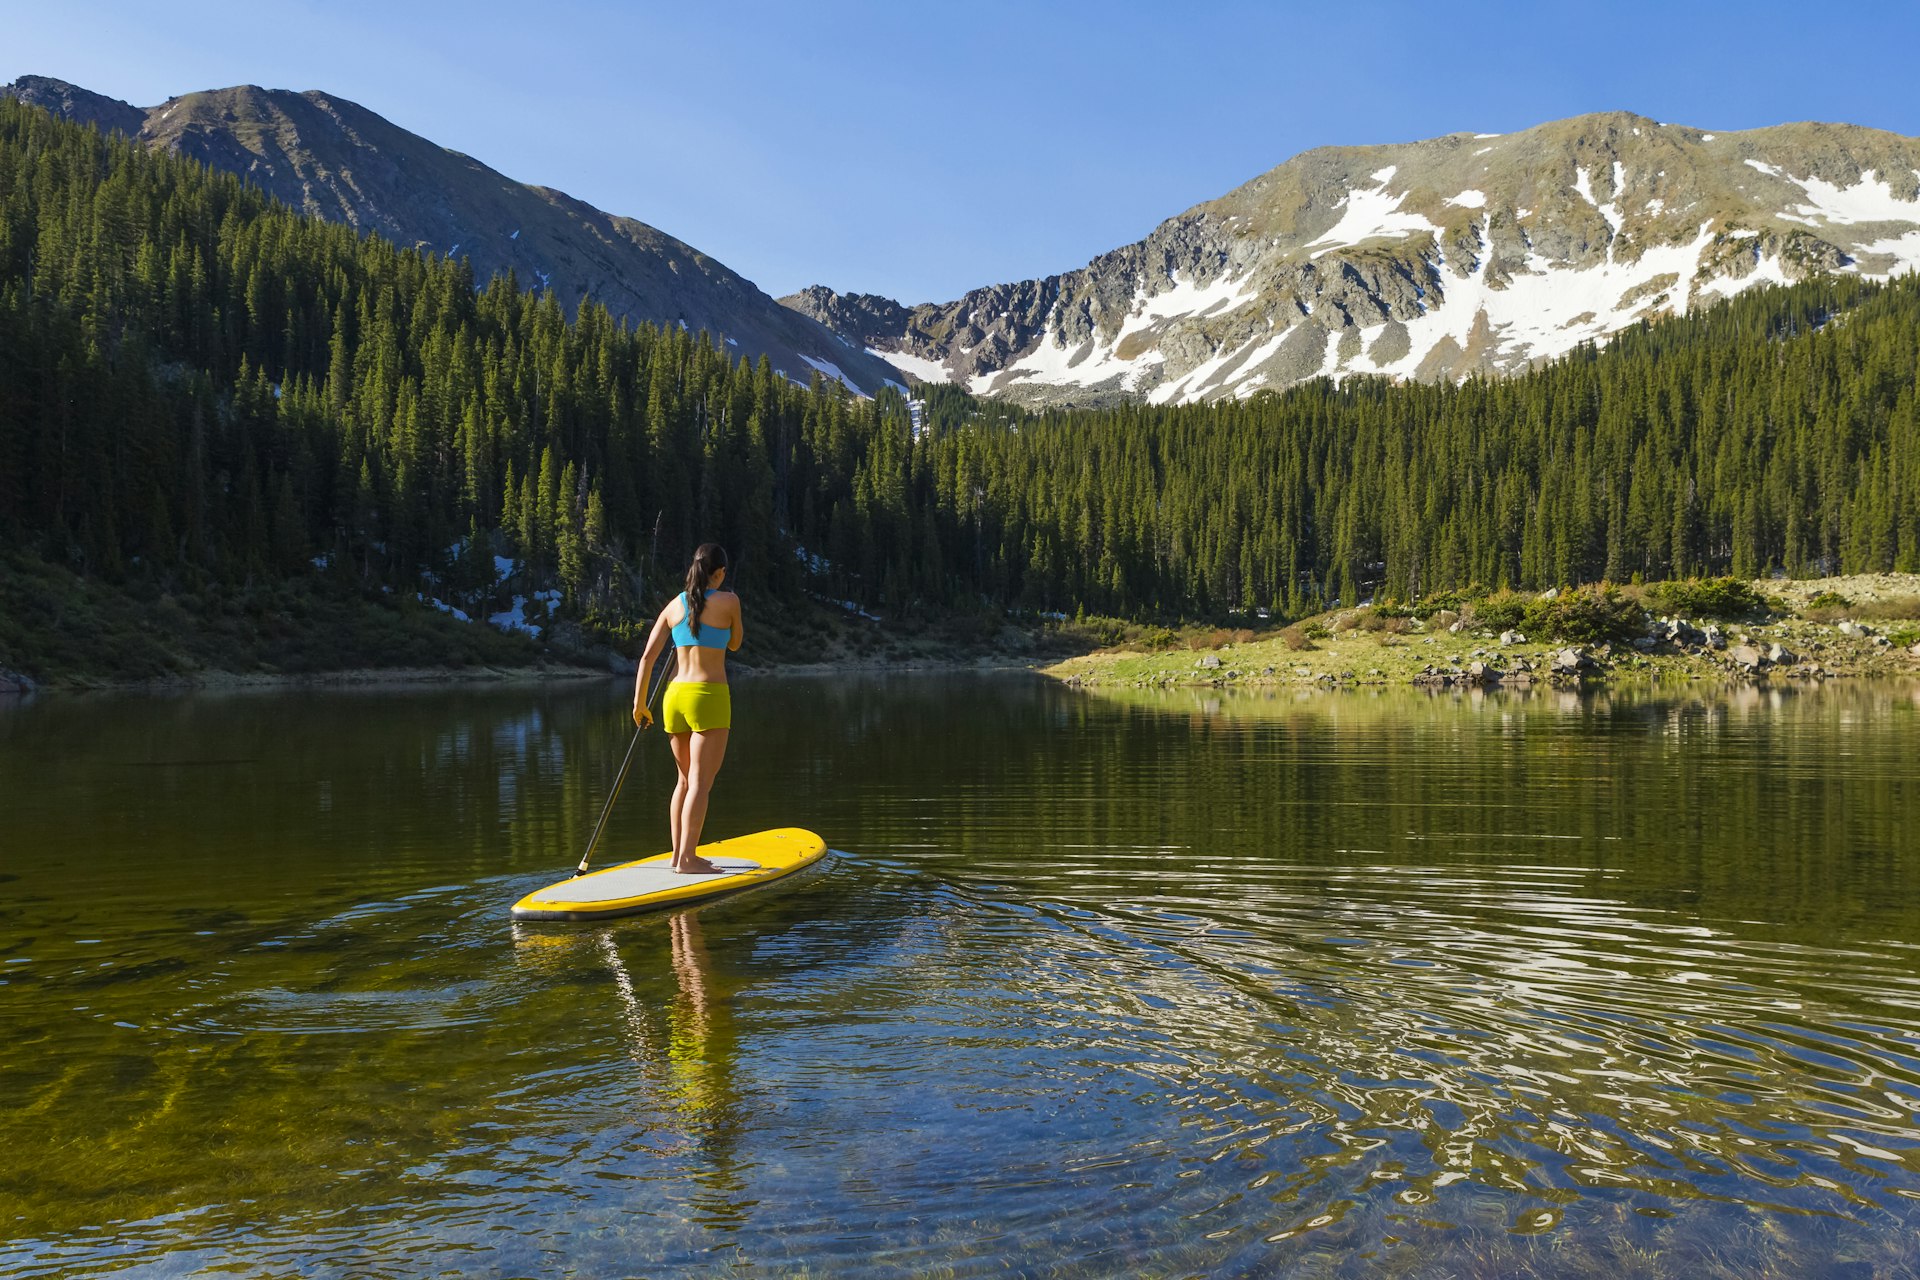 The Rio Chama throws up plenty of SUP challenges, New Mexico